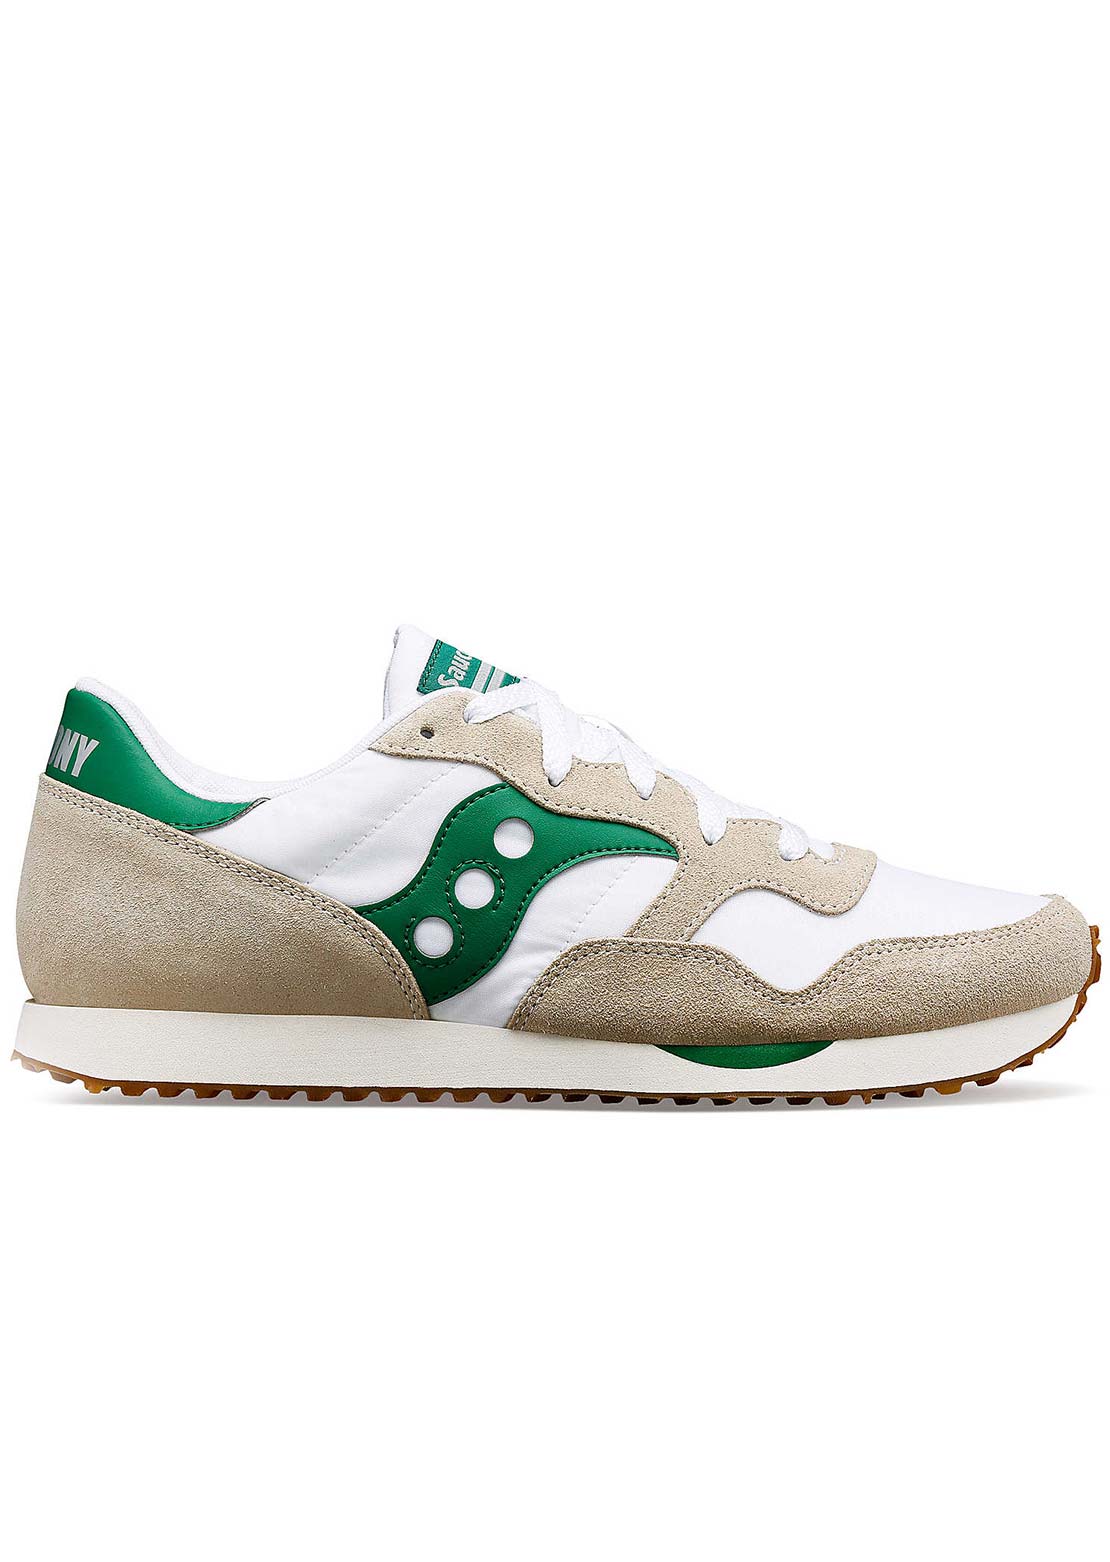 Saucony Unisex DXN Trainer Shoes White/Green